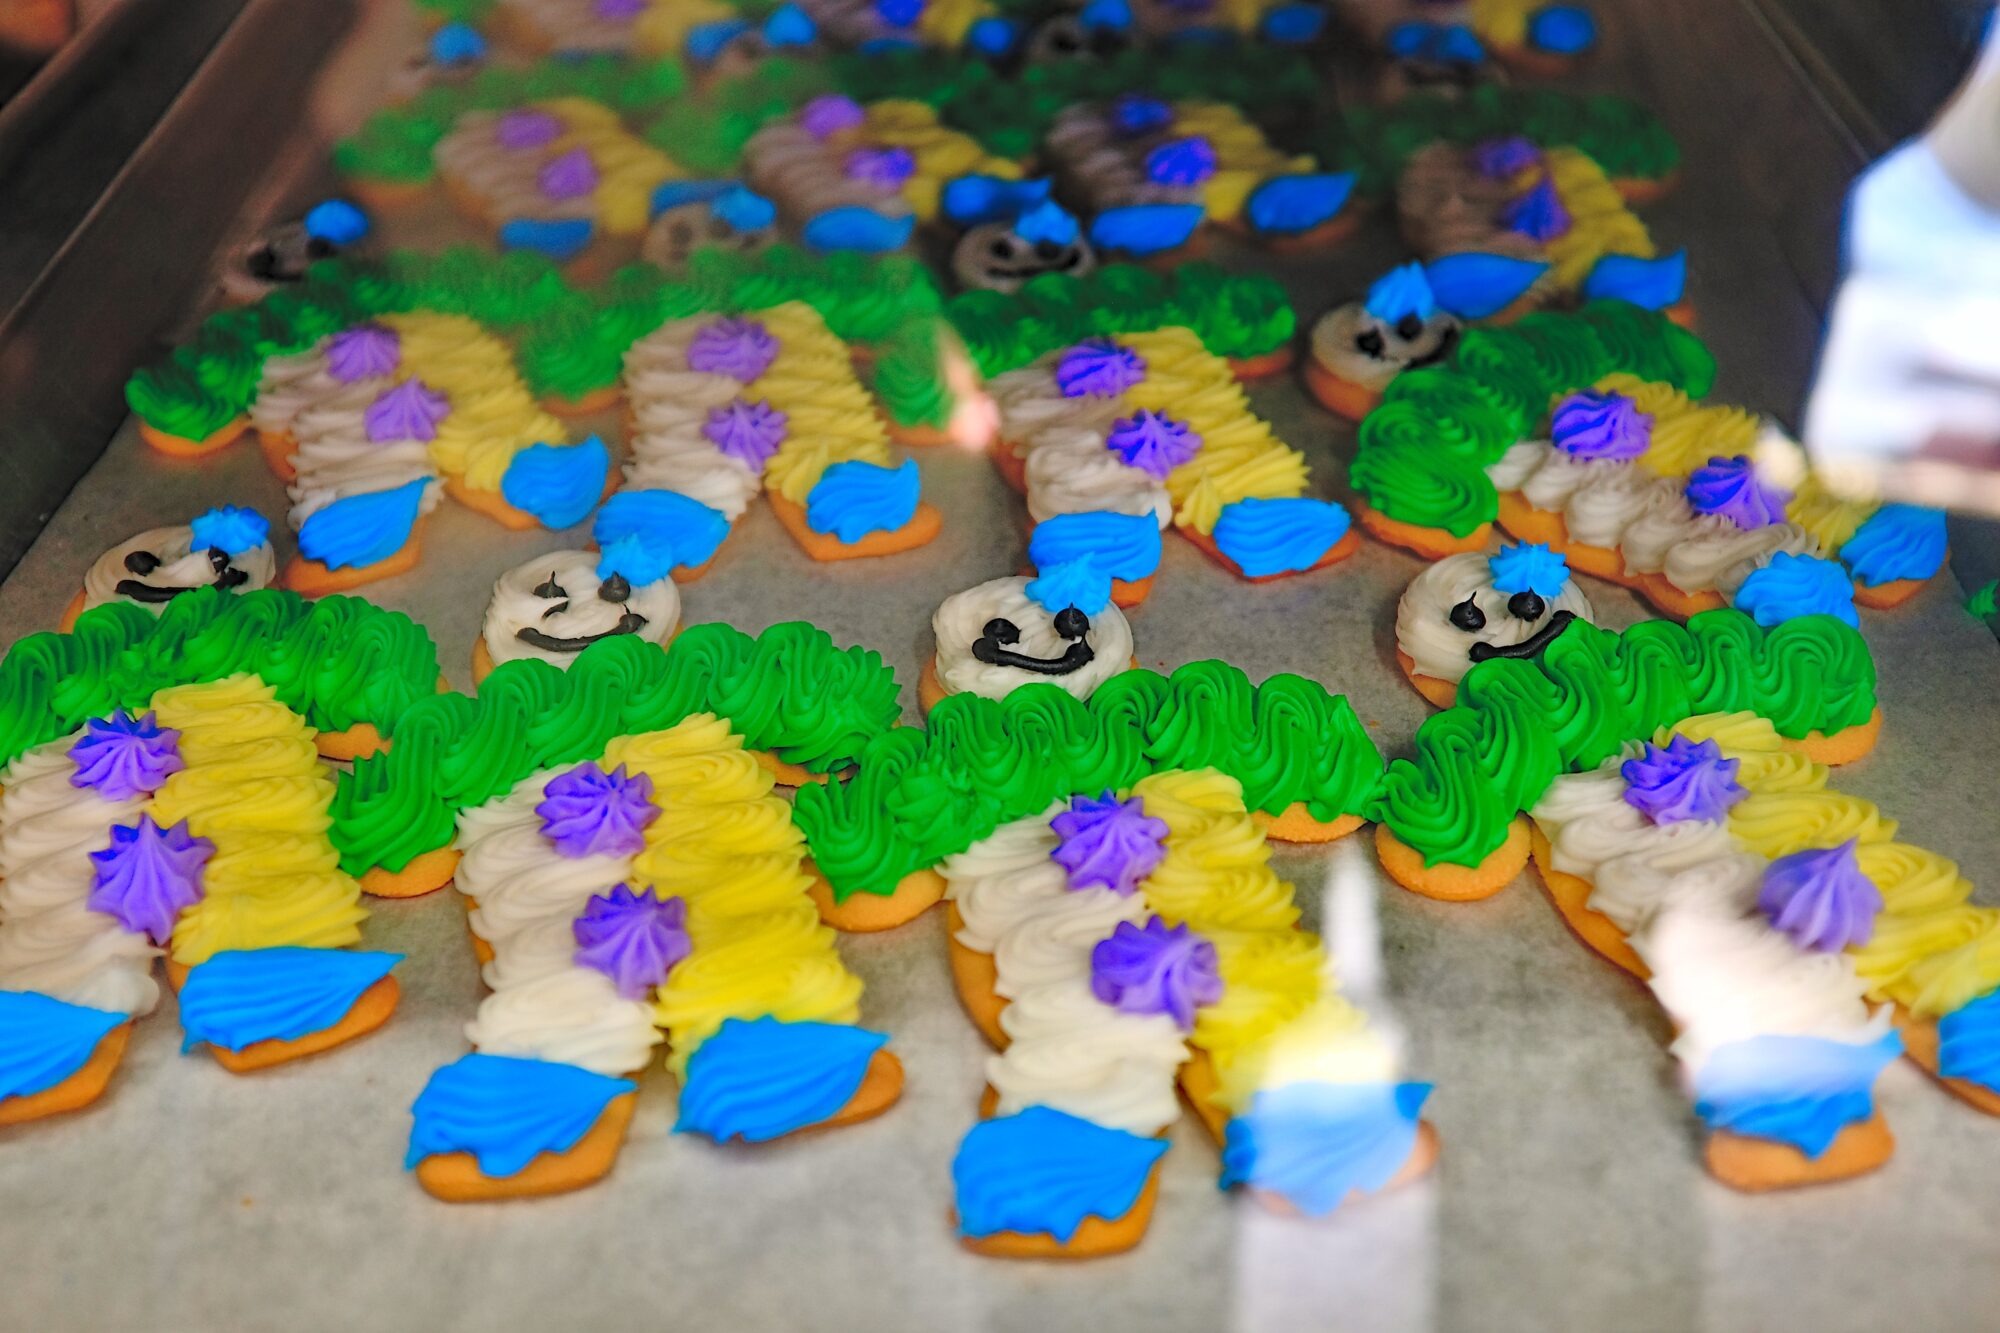 A tray of cookies decorated like clowns